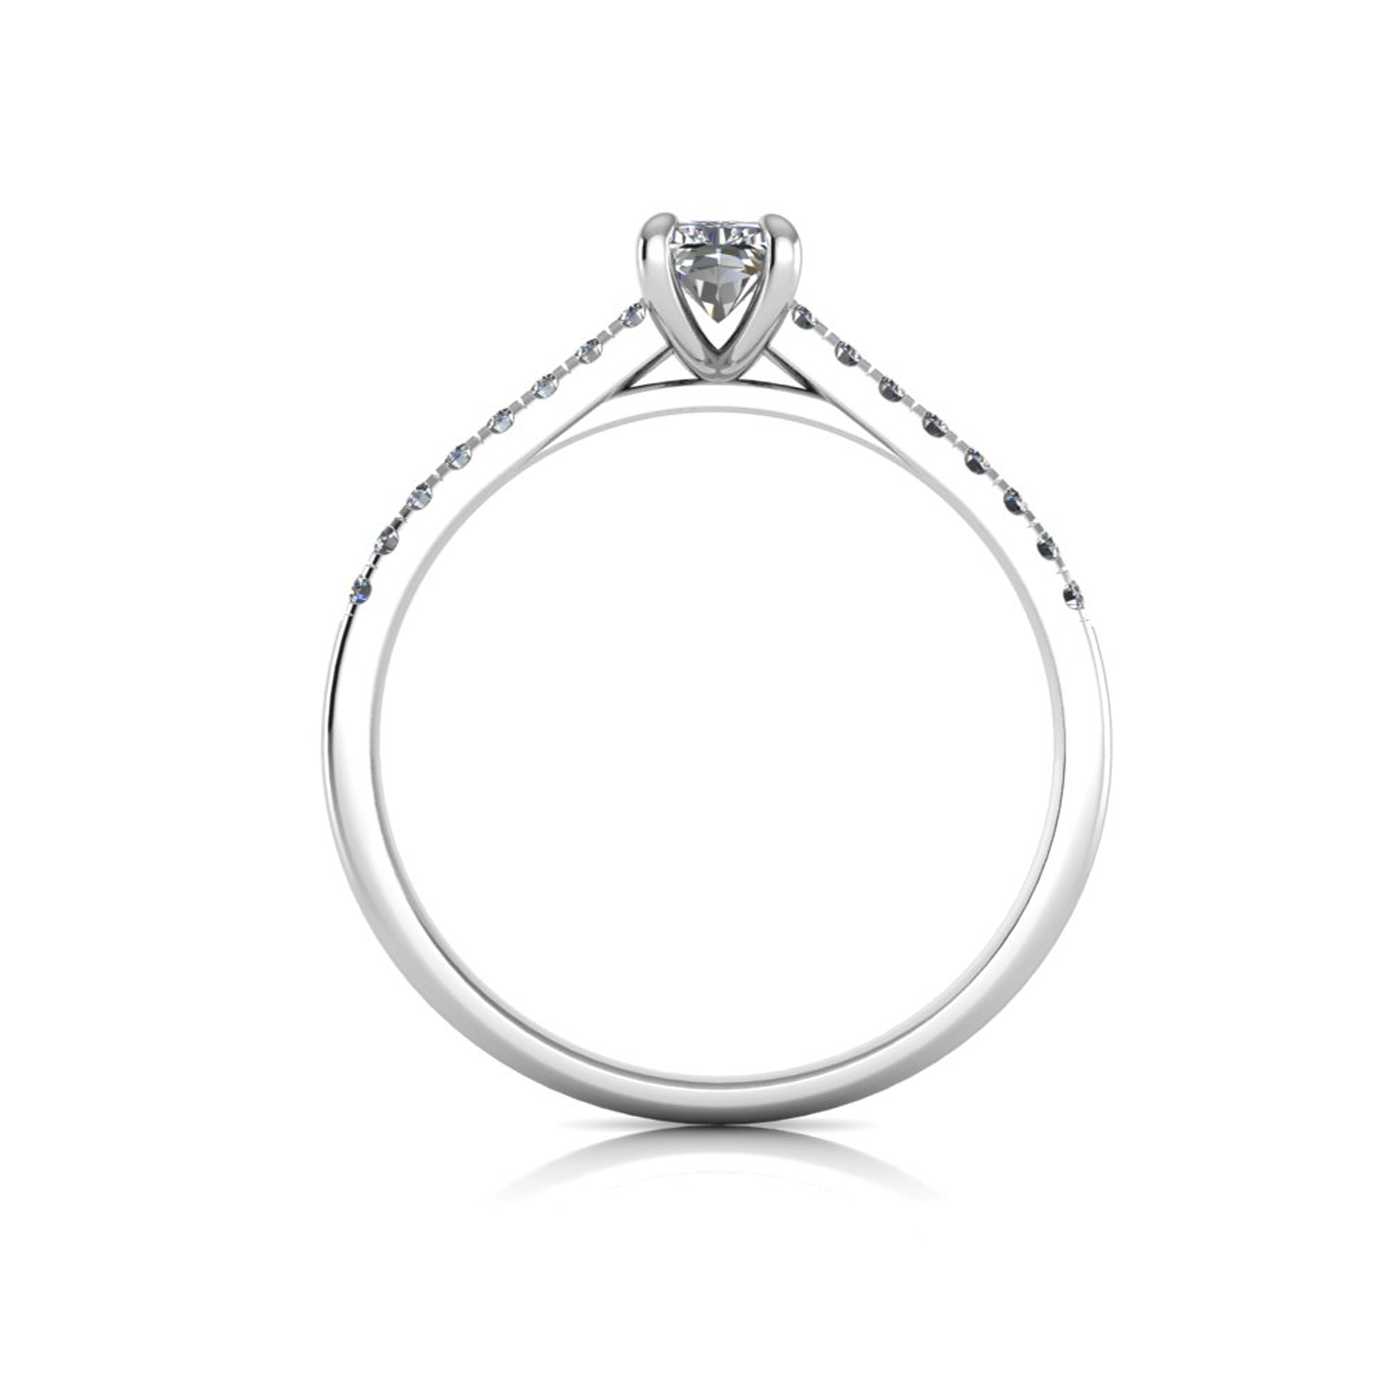 18k white gold  0,50 ct 4 prongs radiant cut diamond engagement ring with whisper thin pavÉ set band